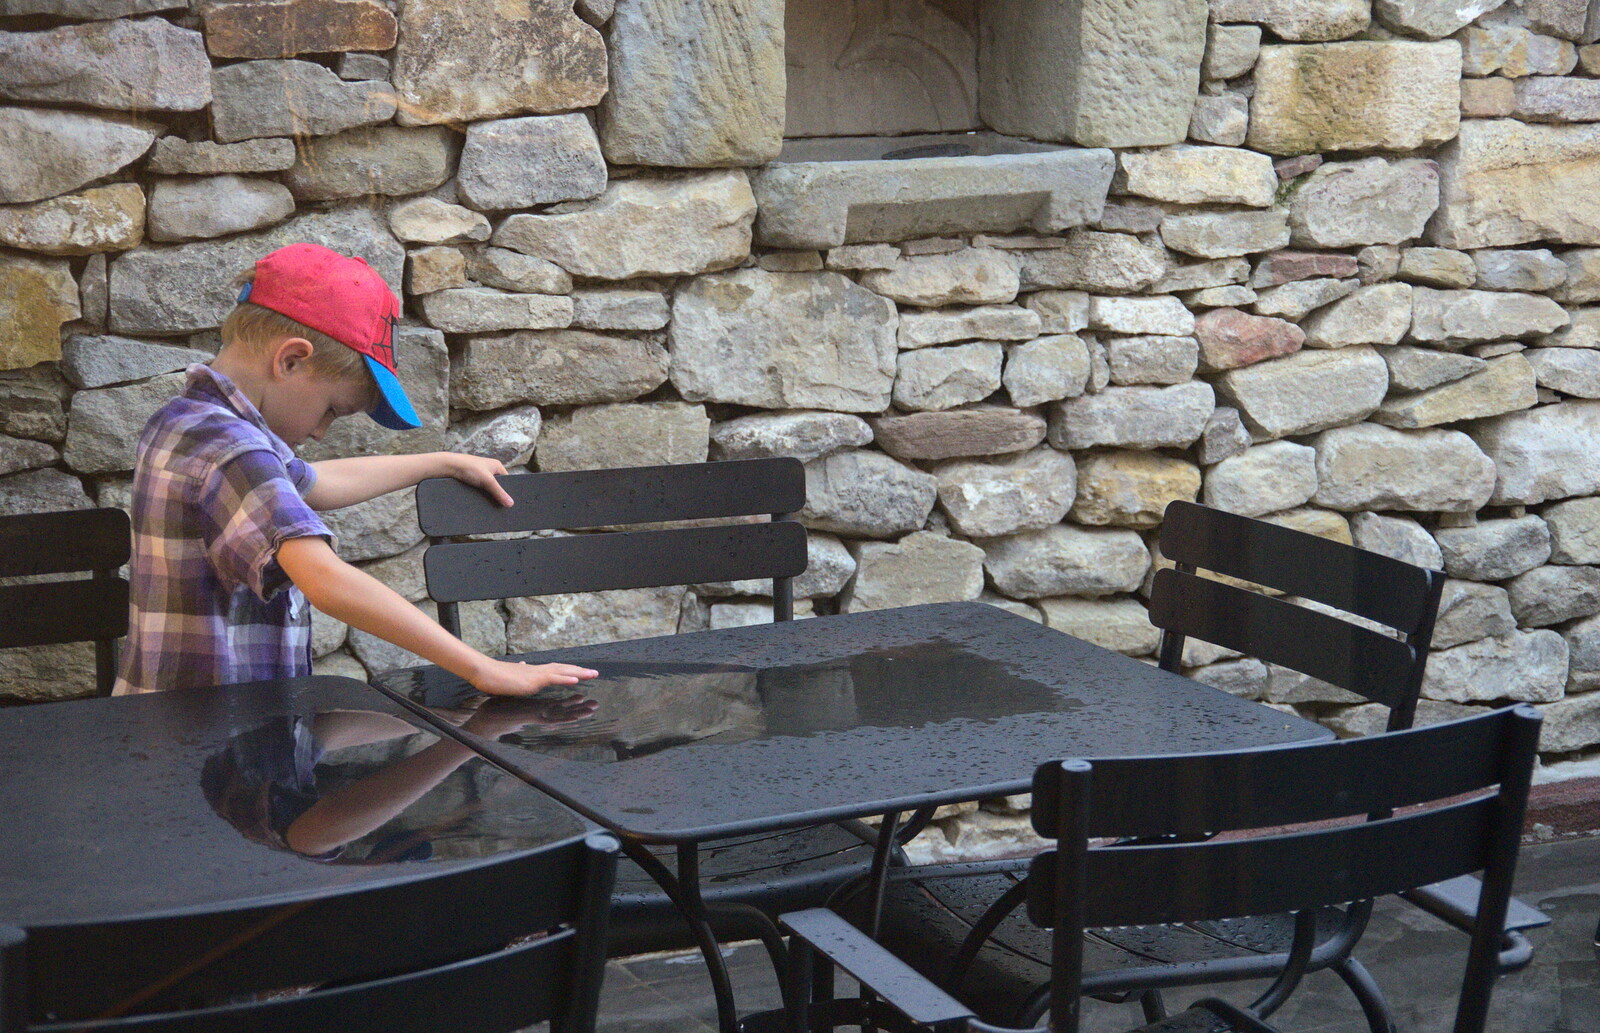 Harry pokes standing water on a table from A Trip to Carcassonne, Aude, France - 8th August 2018